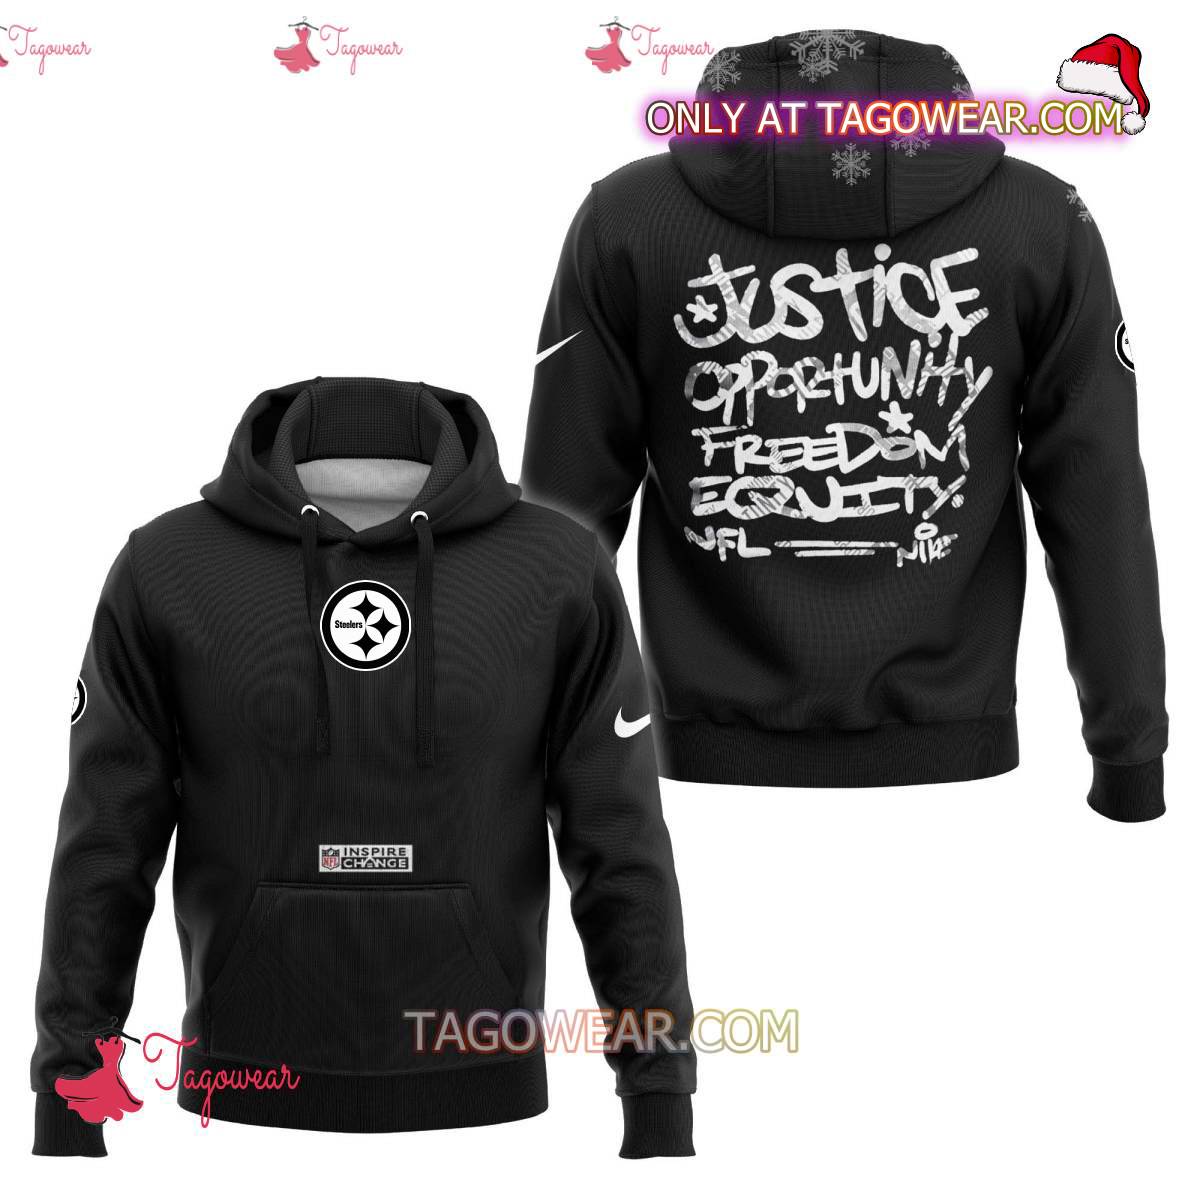 Pittsburgh Steelers NFL Inspire Change Justice Opportunity Equality Freedom Hoodie